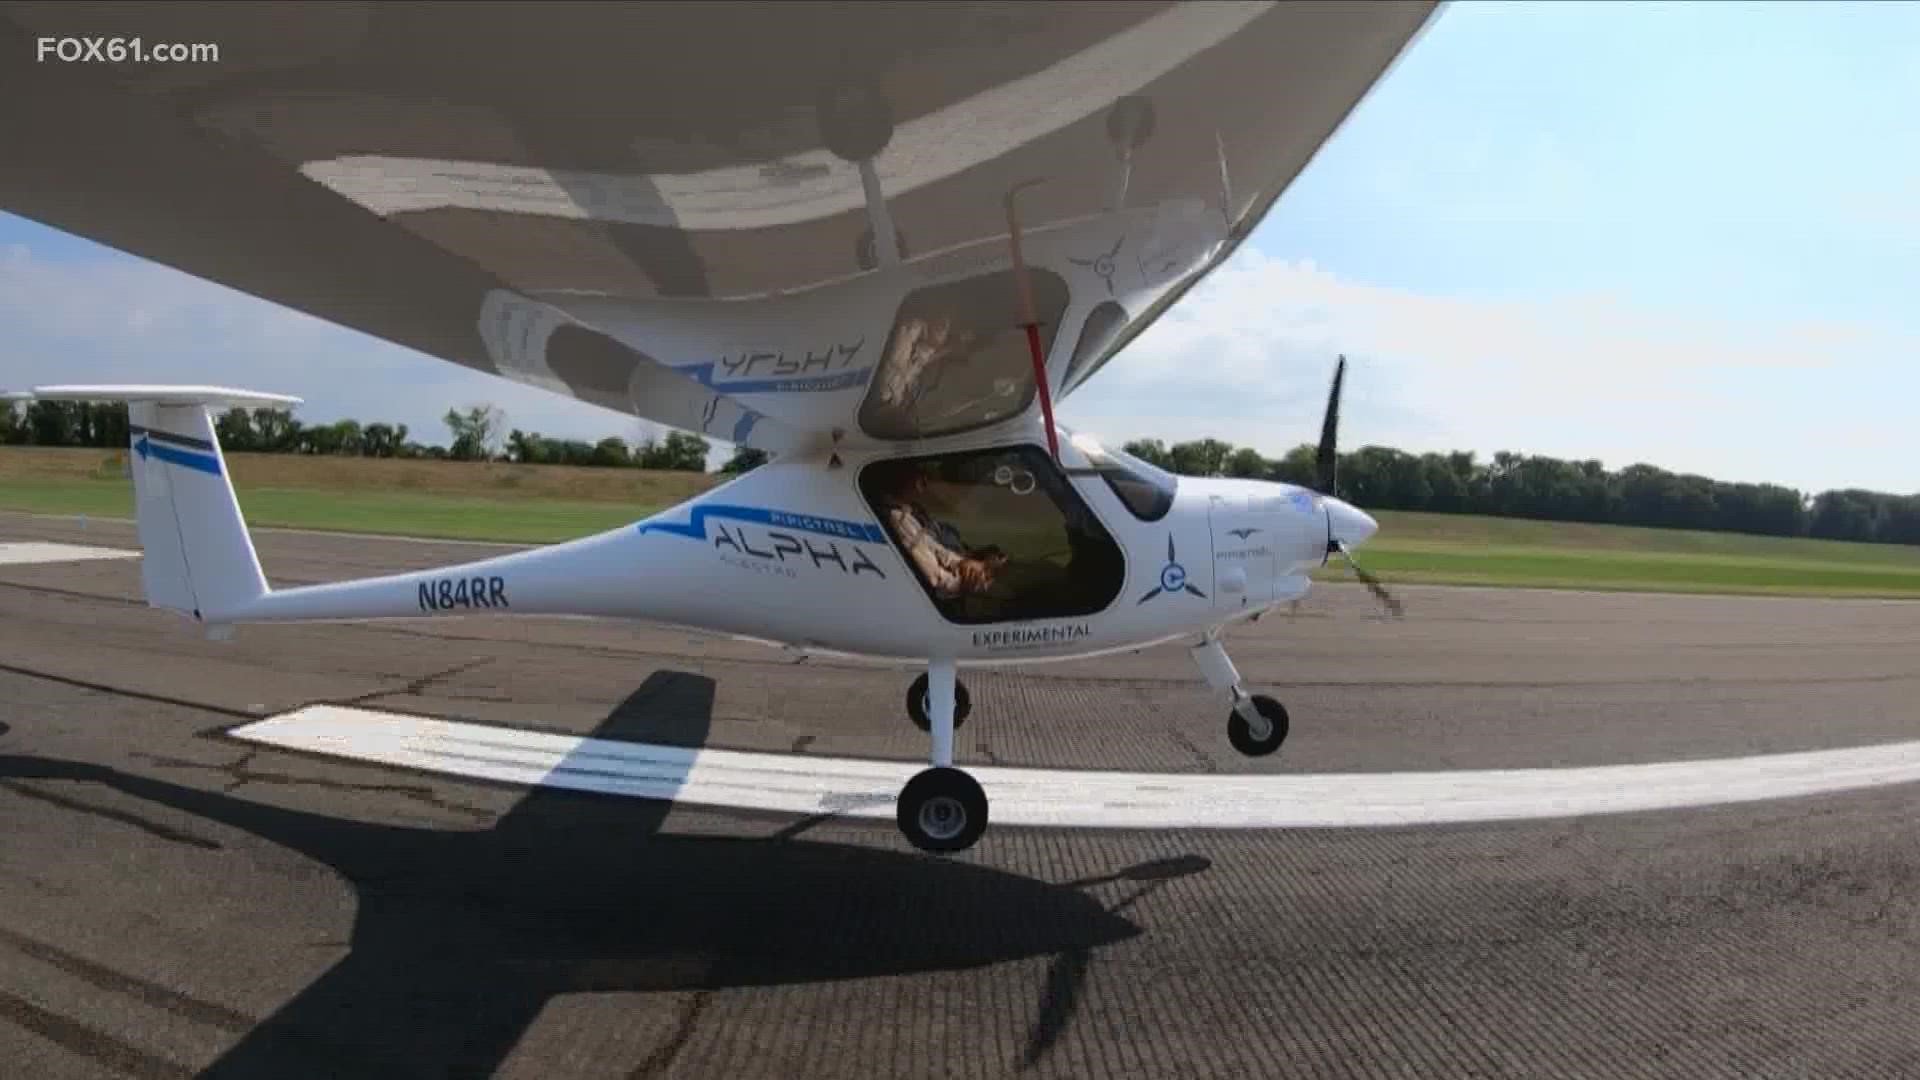 The Pipistrel is a battery powered plane that’s been purchased by Phil Smith who is a flight instructor and the owner of Hartford Aviation Technologies.